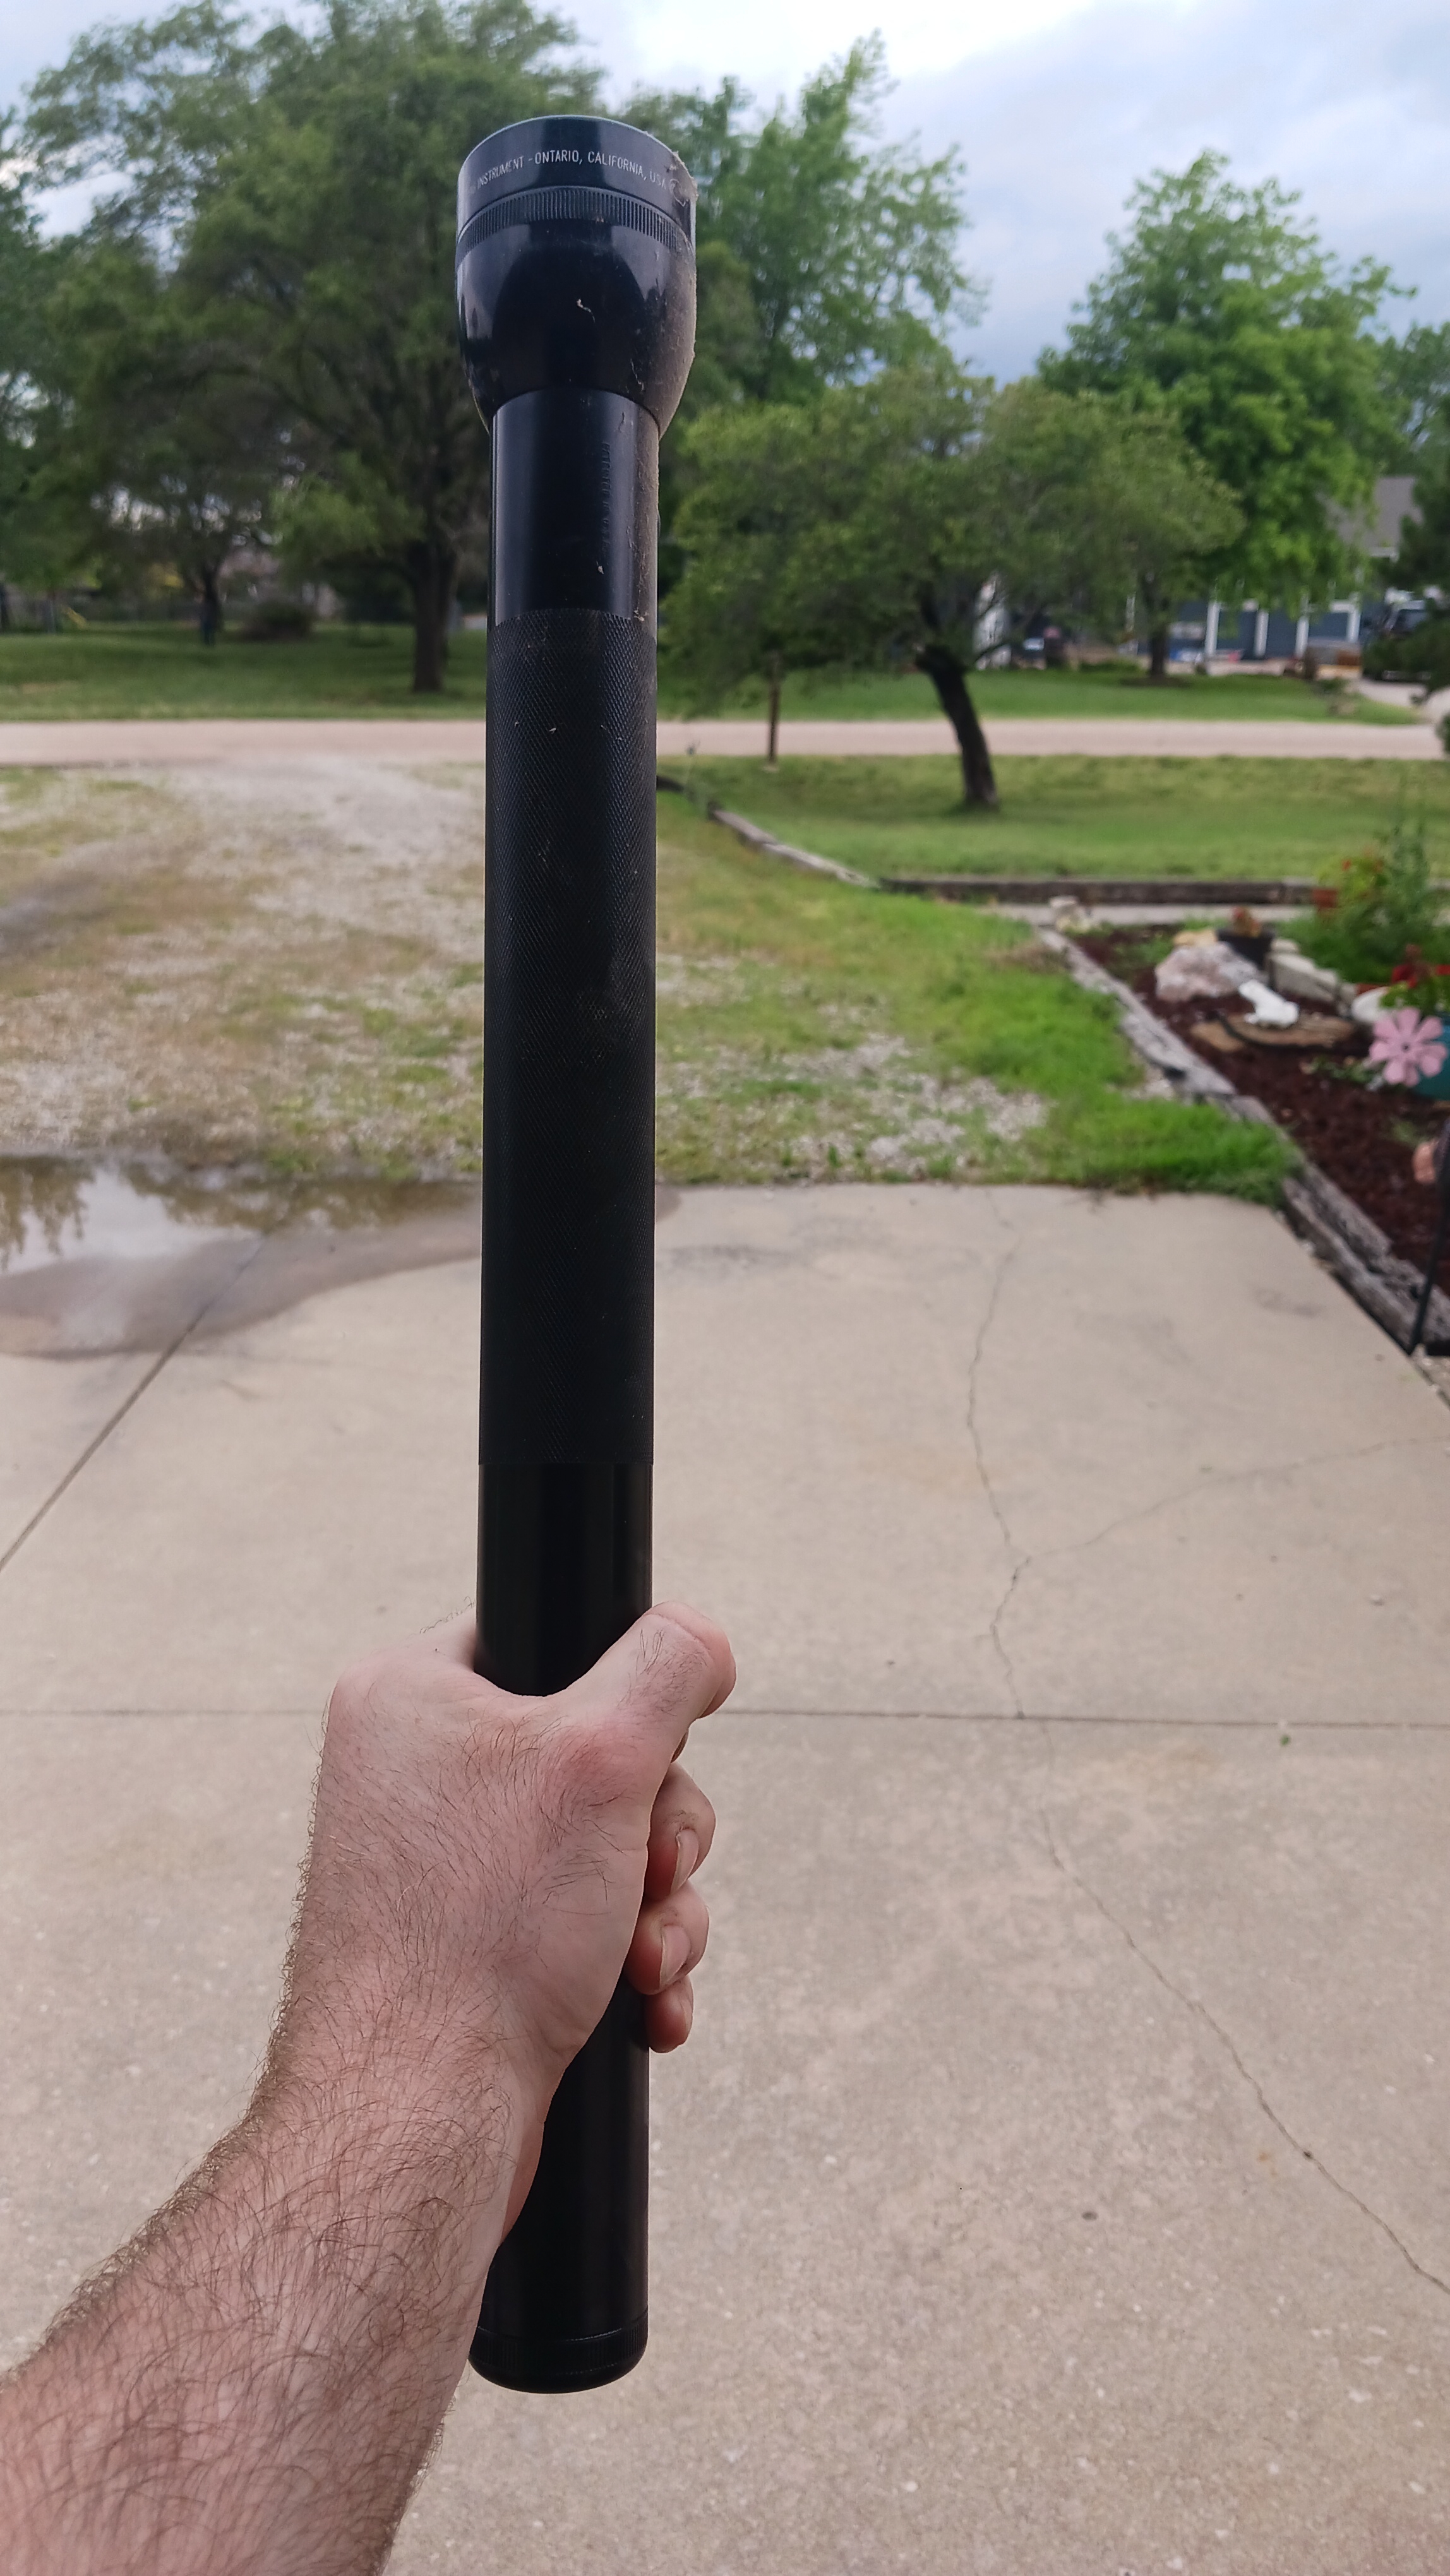 found-this-maglite-in-my-grandfathers-garage-overkill-much-v0-grv70jb3t7ab1.jpg